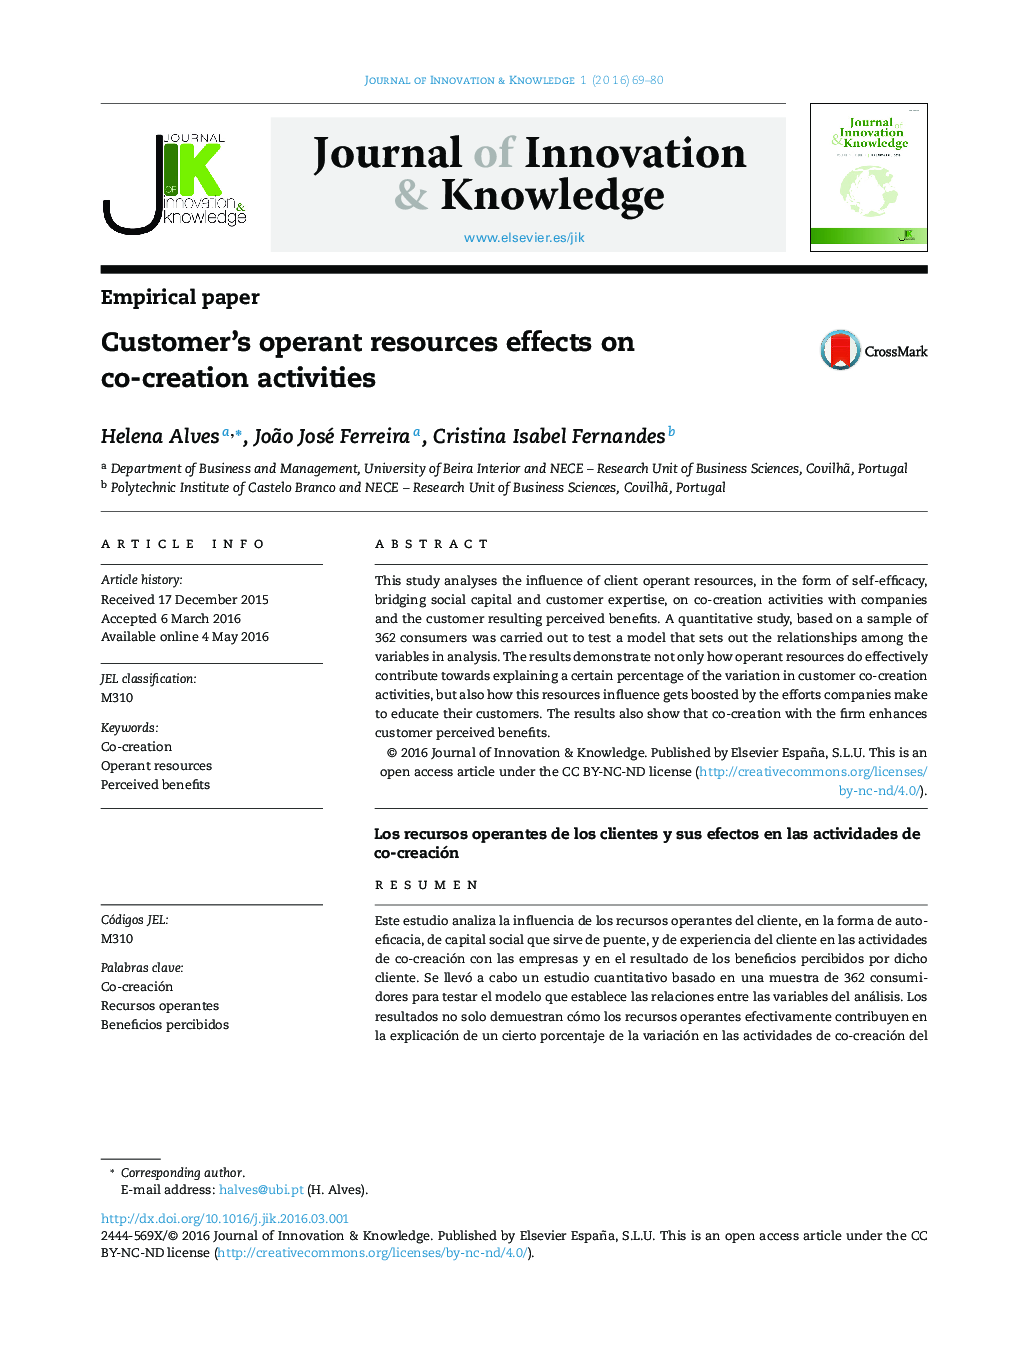 Customer's operant resources effects on co-creation activities